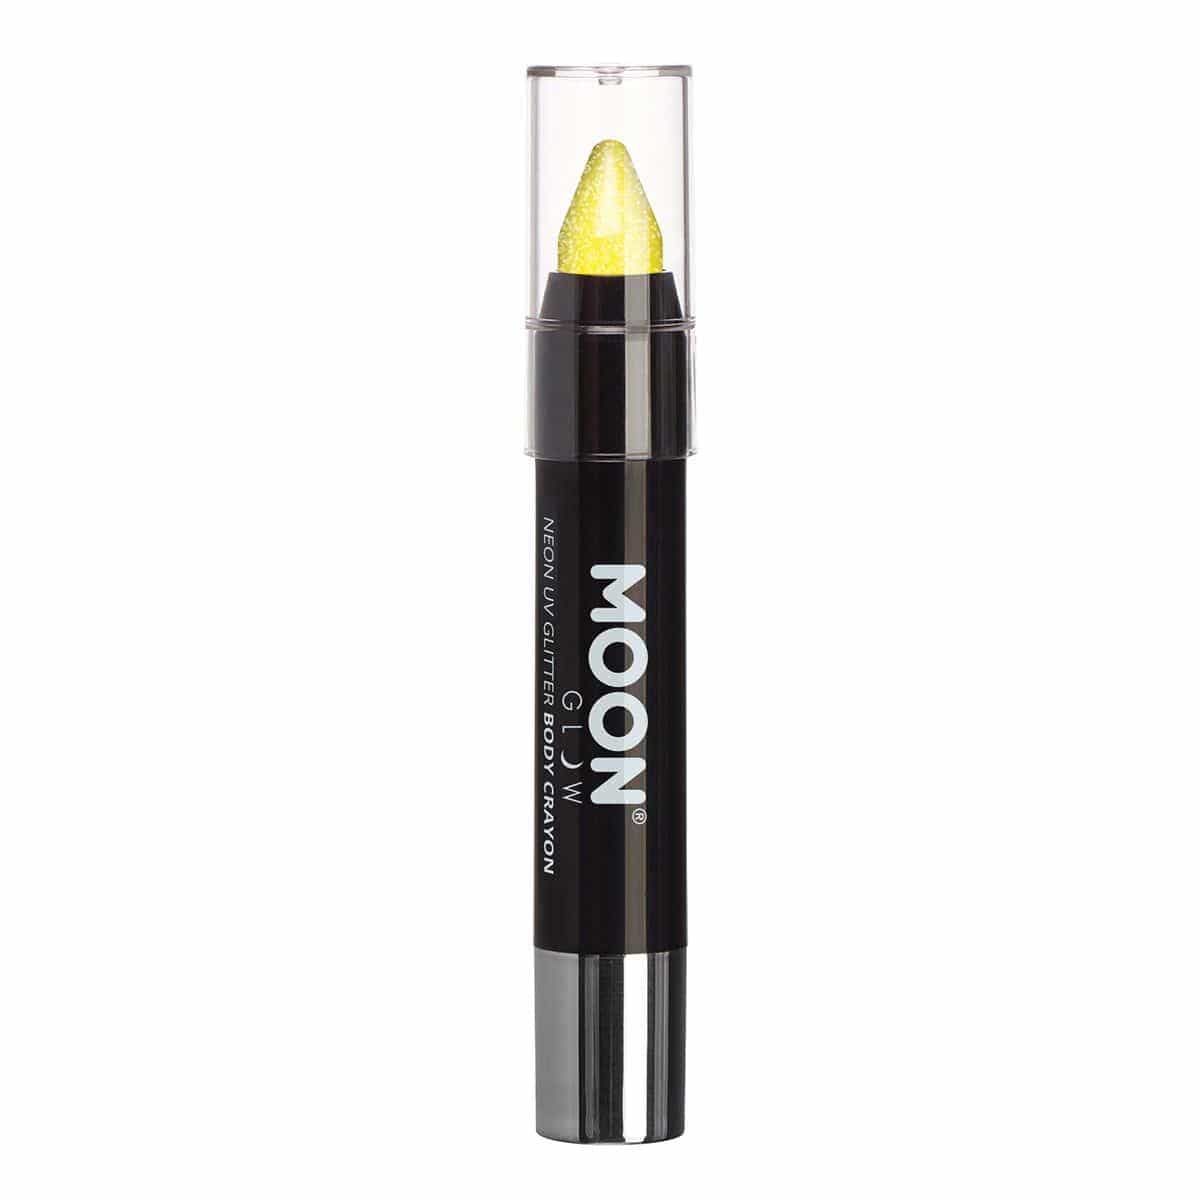 Buy Costume Accessories Moon yellow glitter UV face & body crayon sold at Party Expert